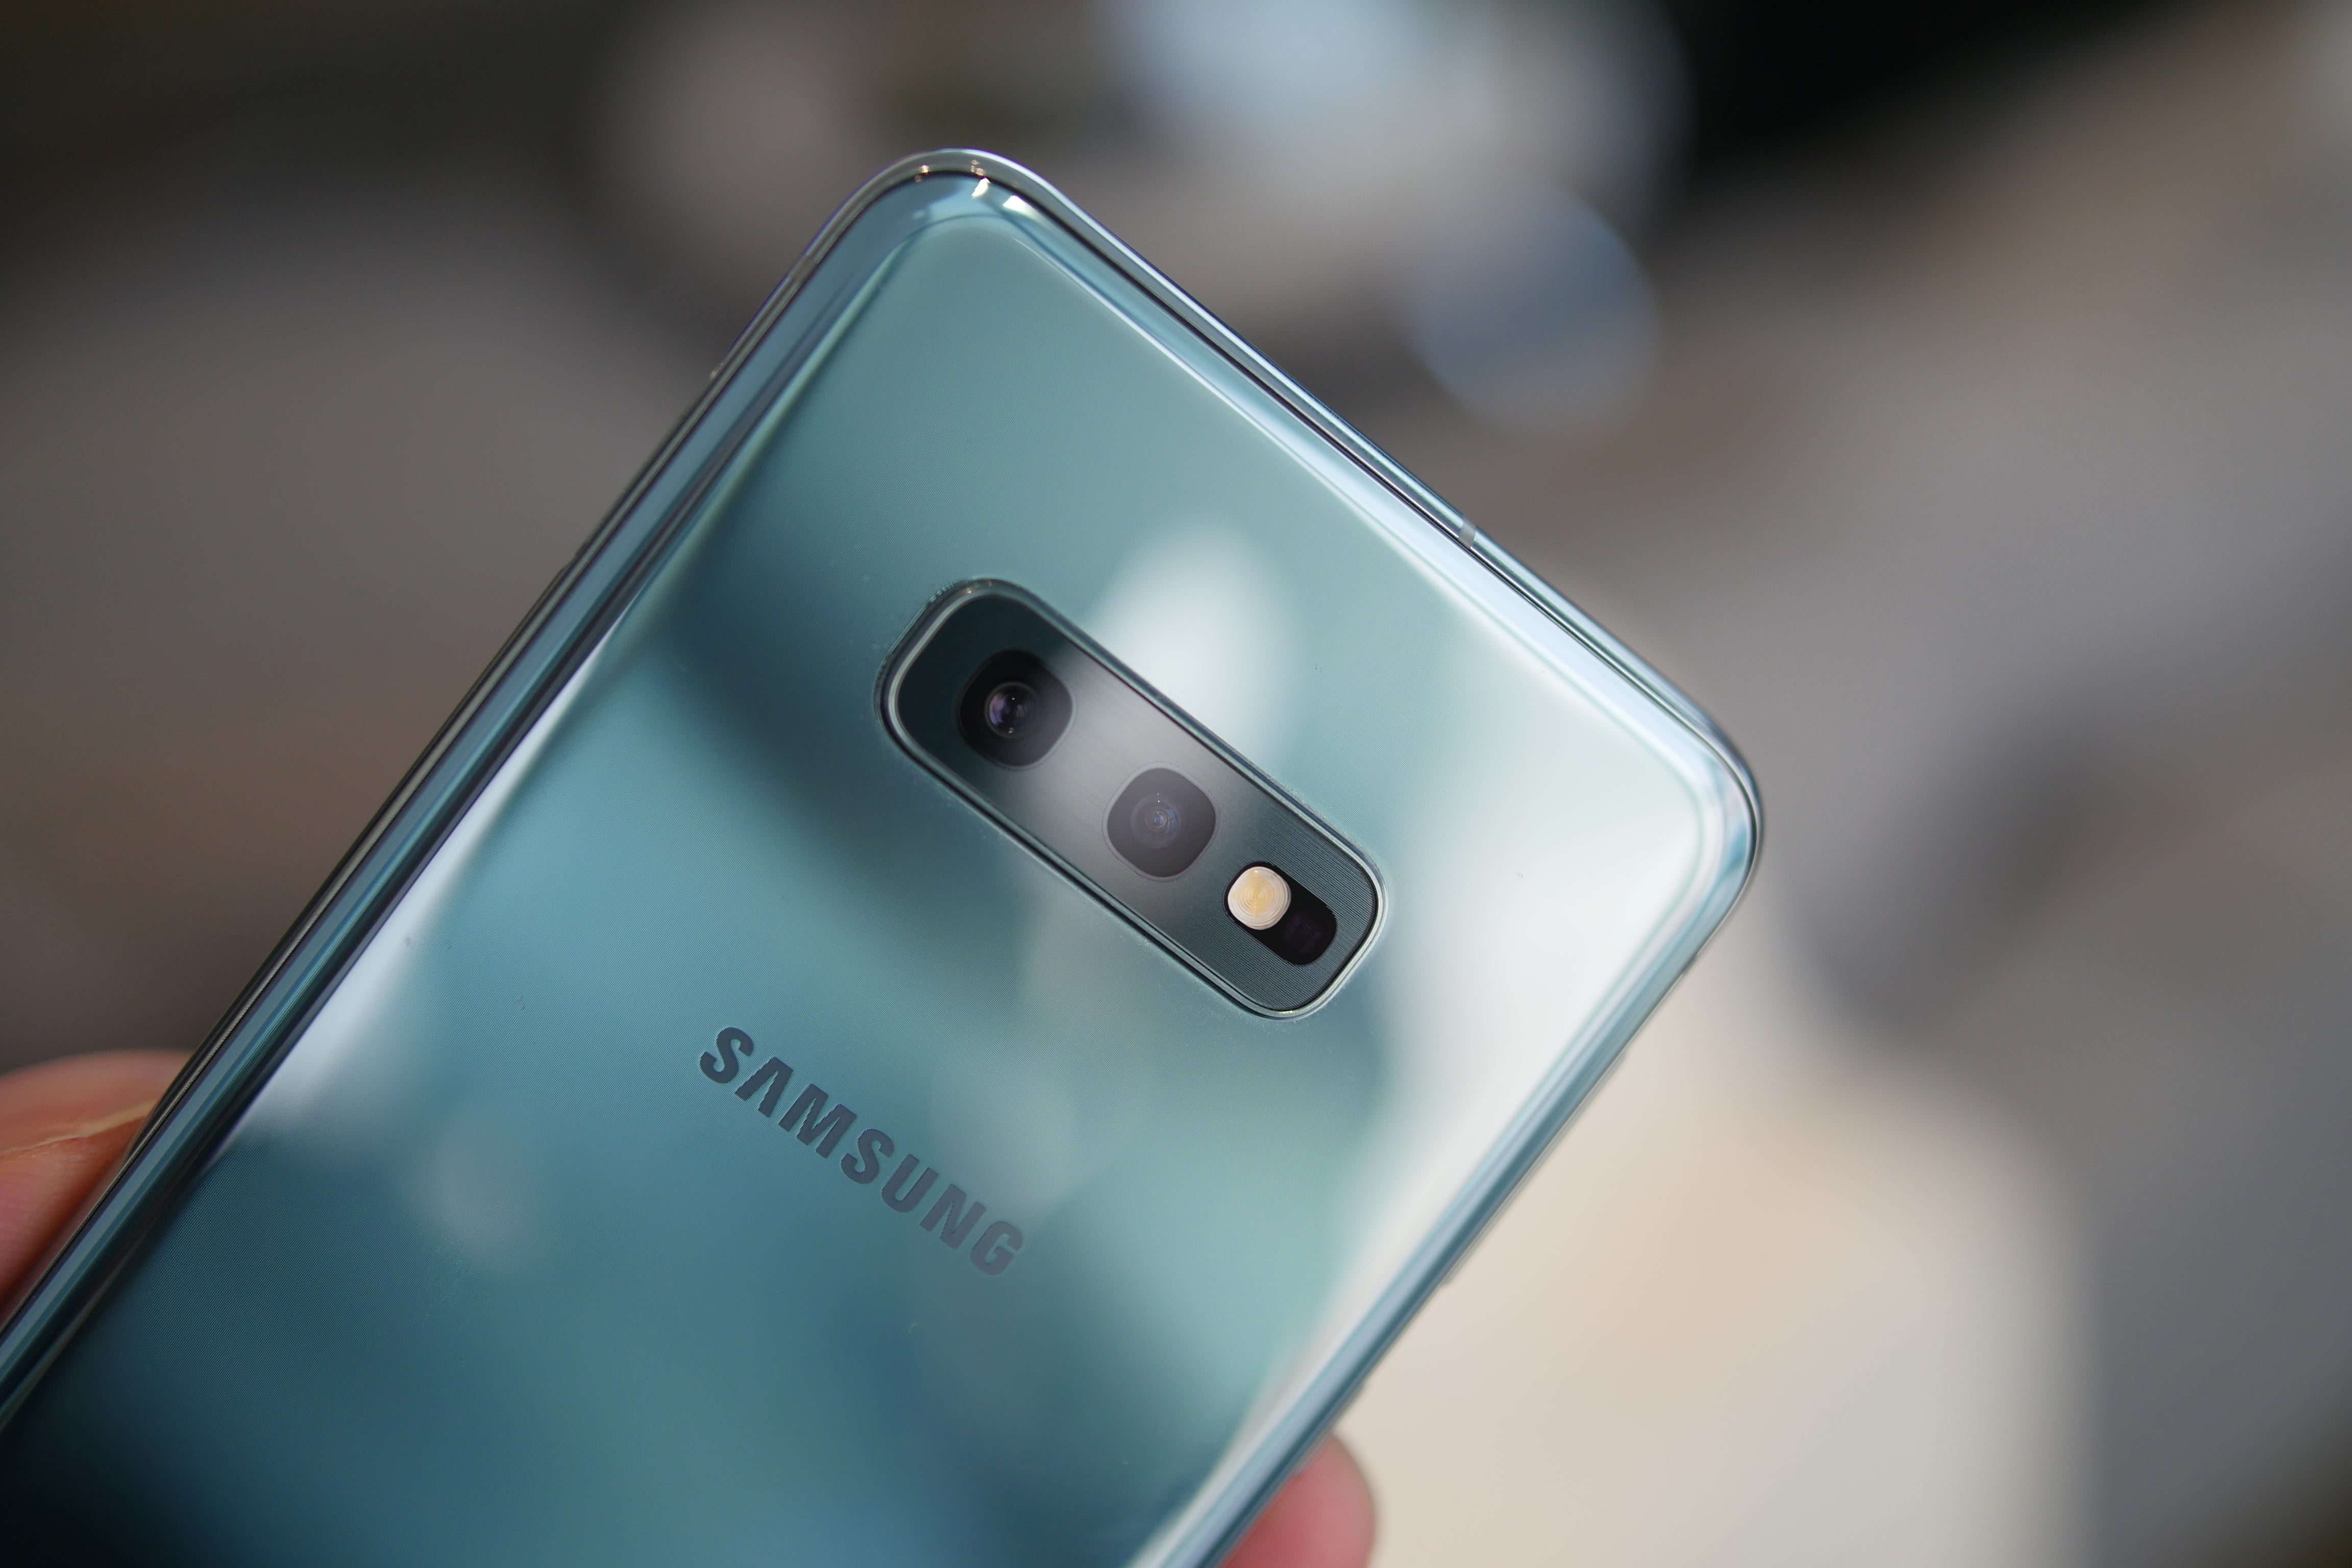 The new Samsung Galaxy S10, S10+, S10e, S10 5G smartphones are official, here&#039;s everything you need to know!